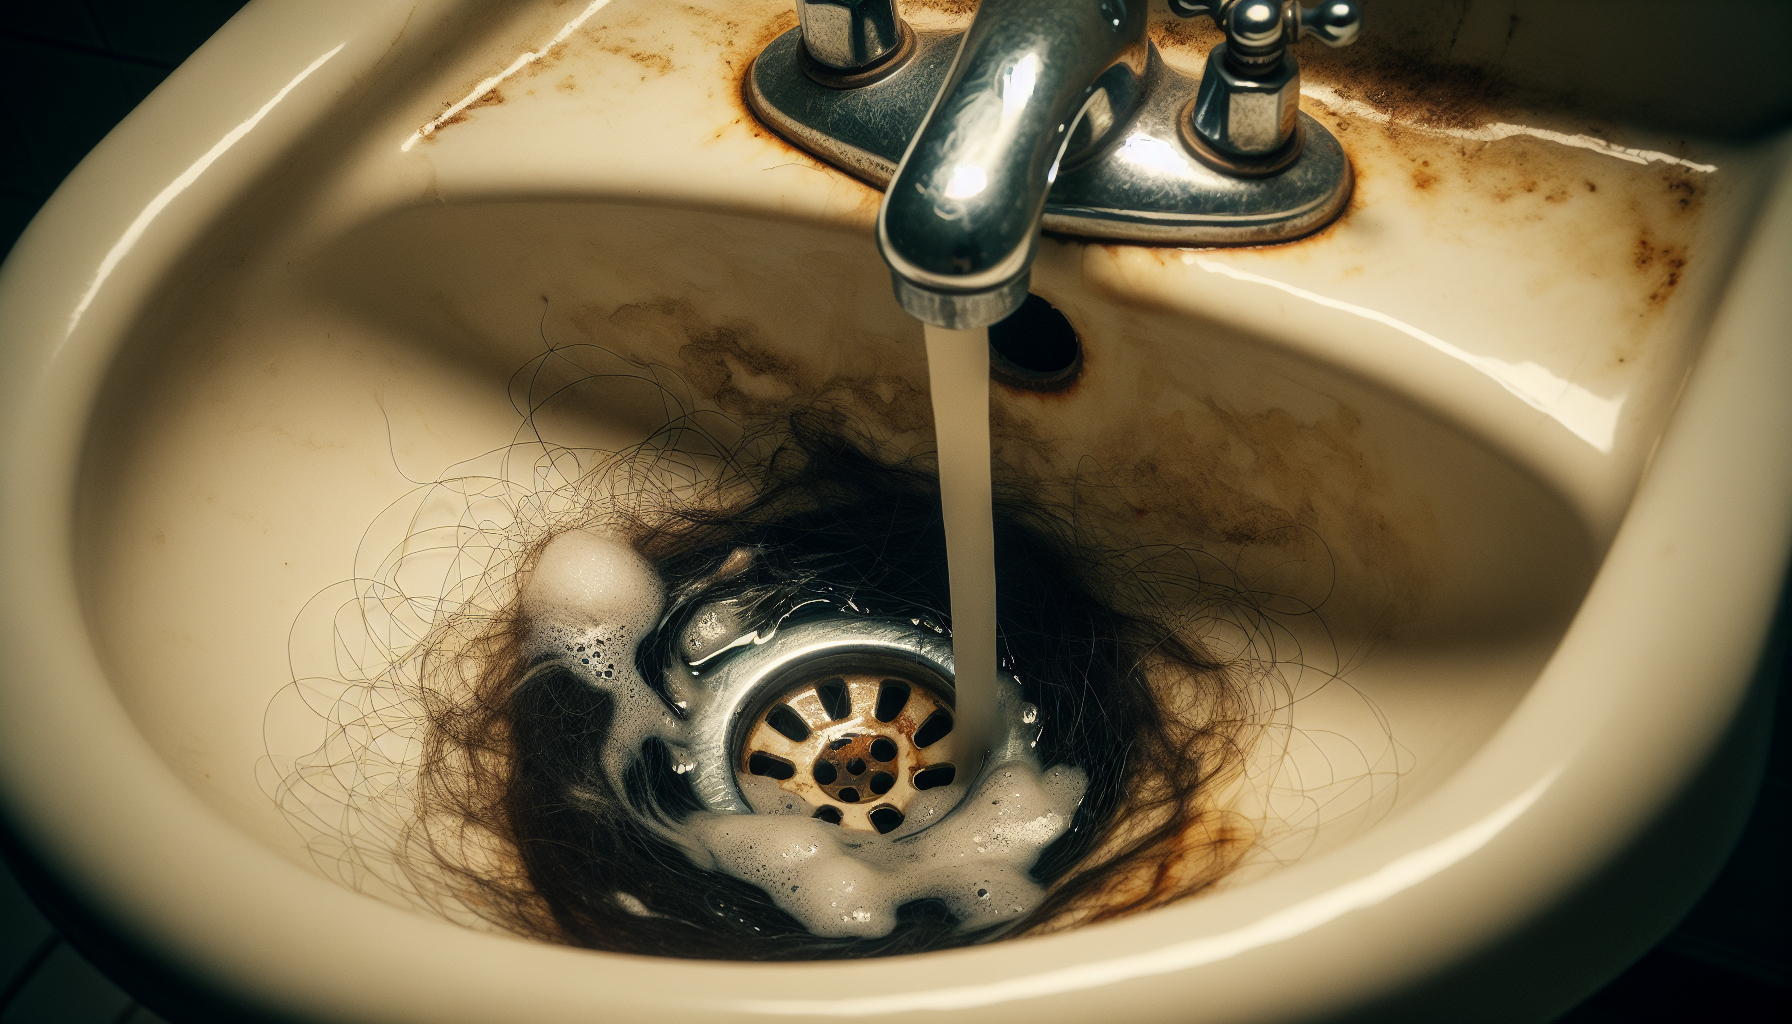 Clogged bathroom sink with hair and soap scum